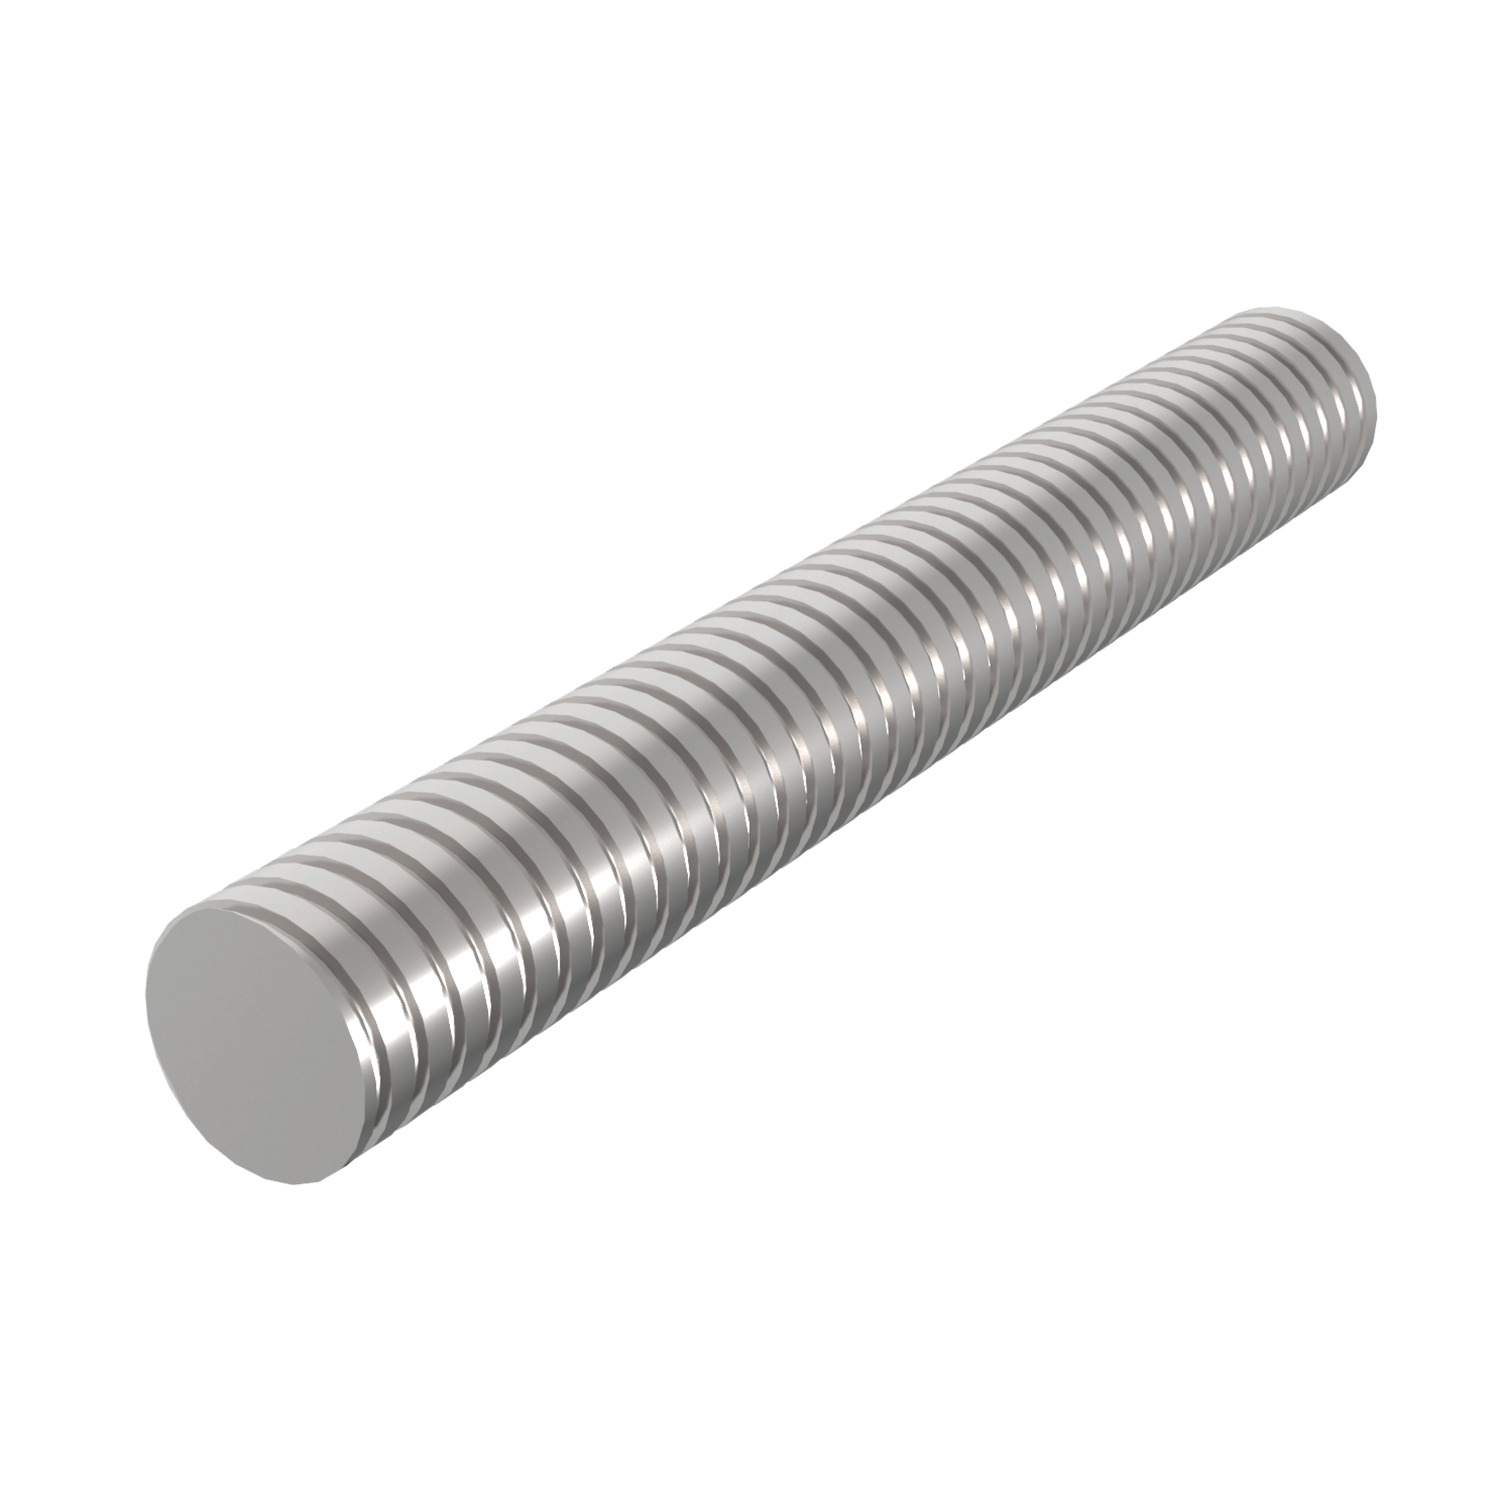 Product L1322, Stainless Lead Screws right hand thread / 